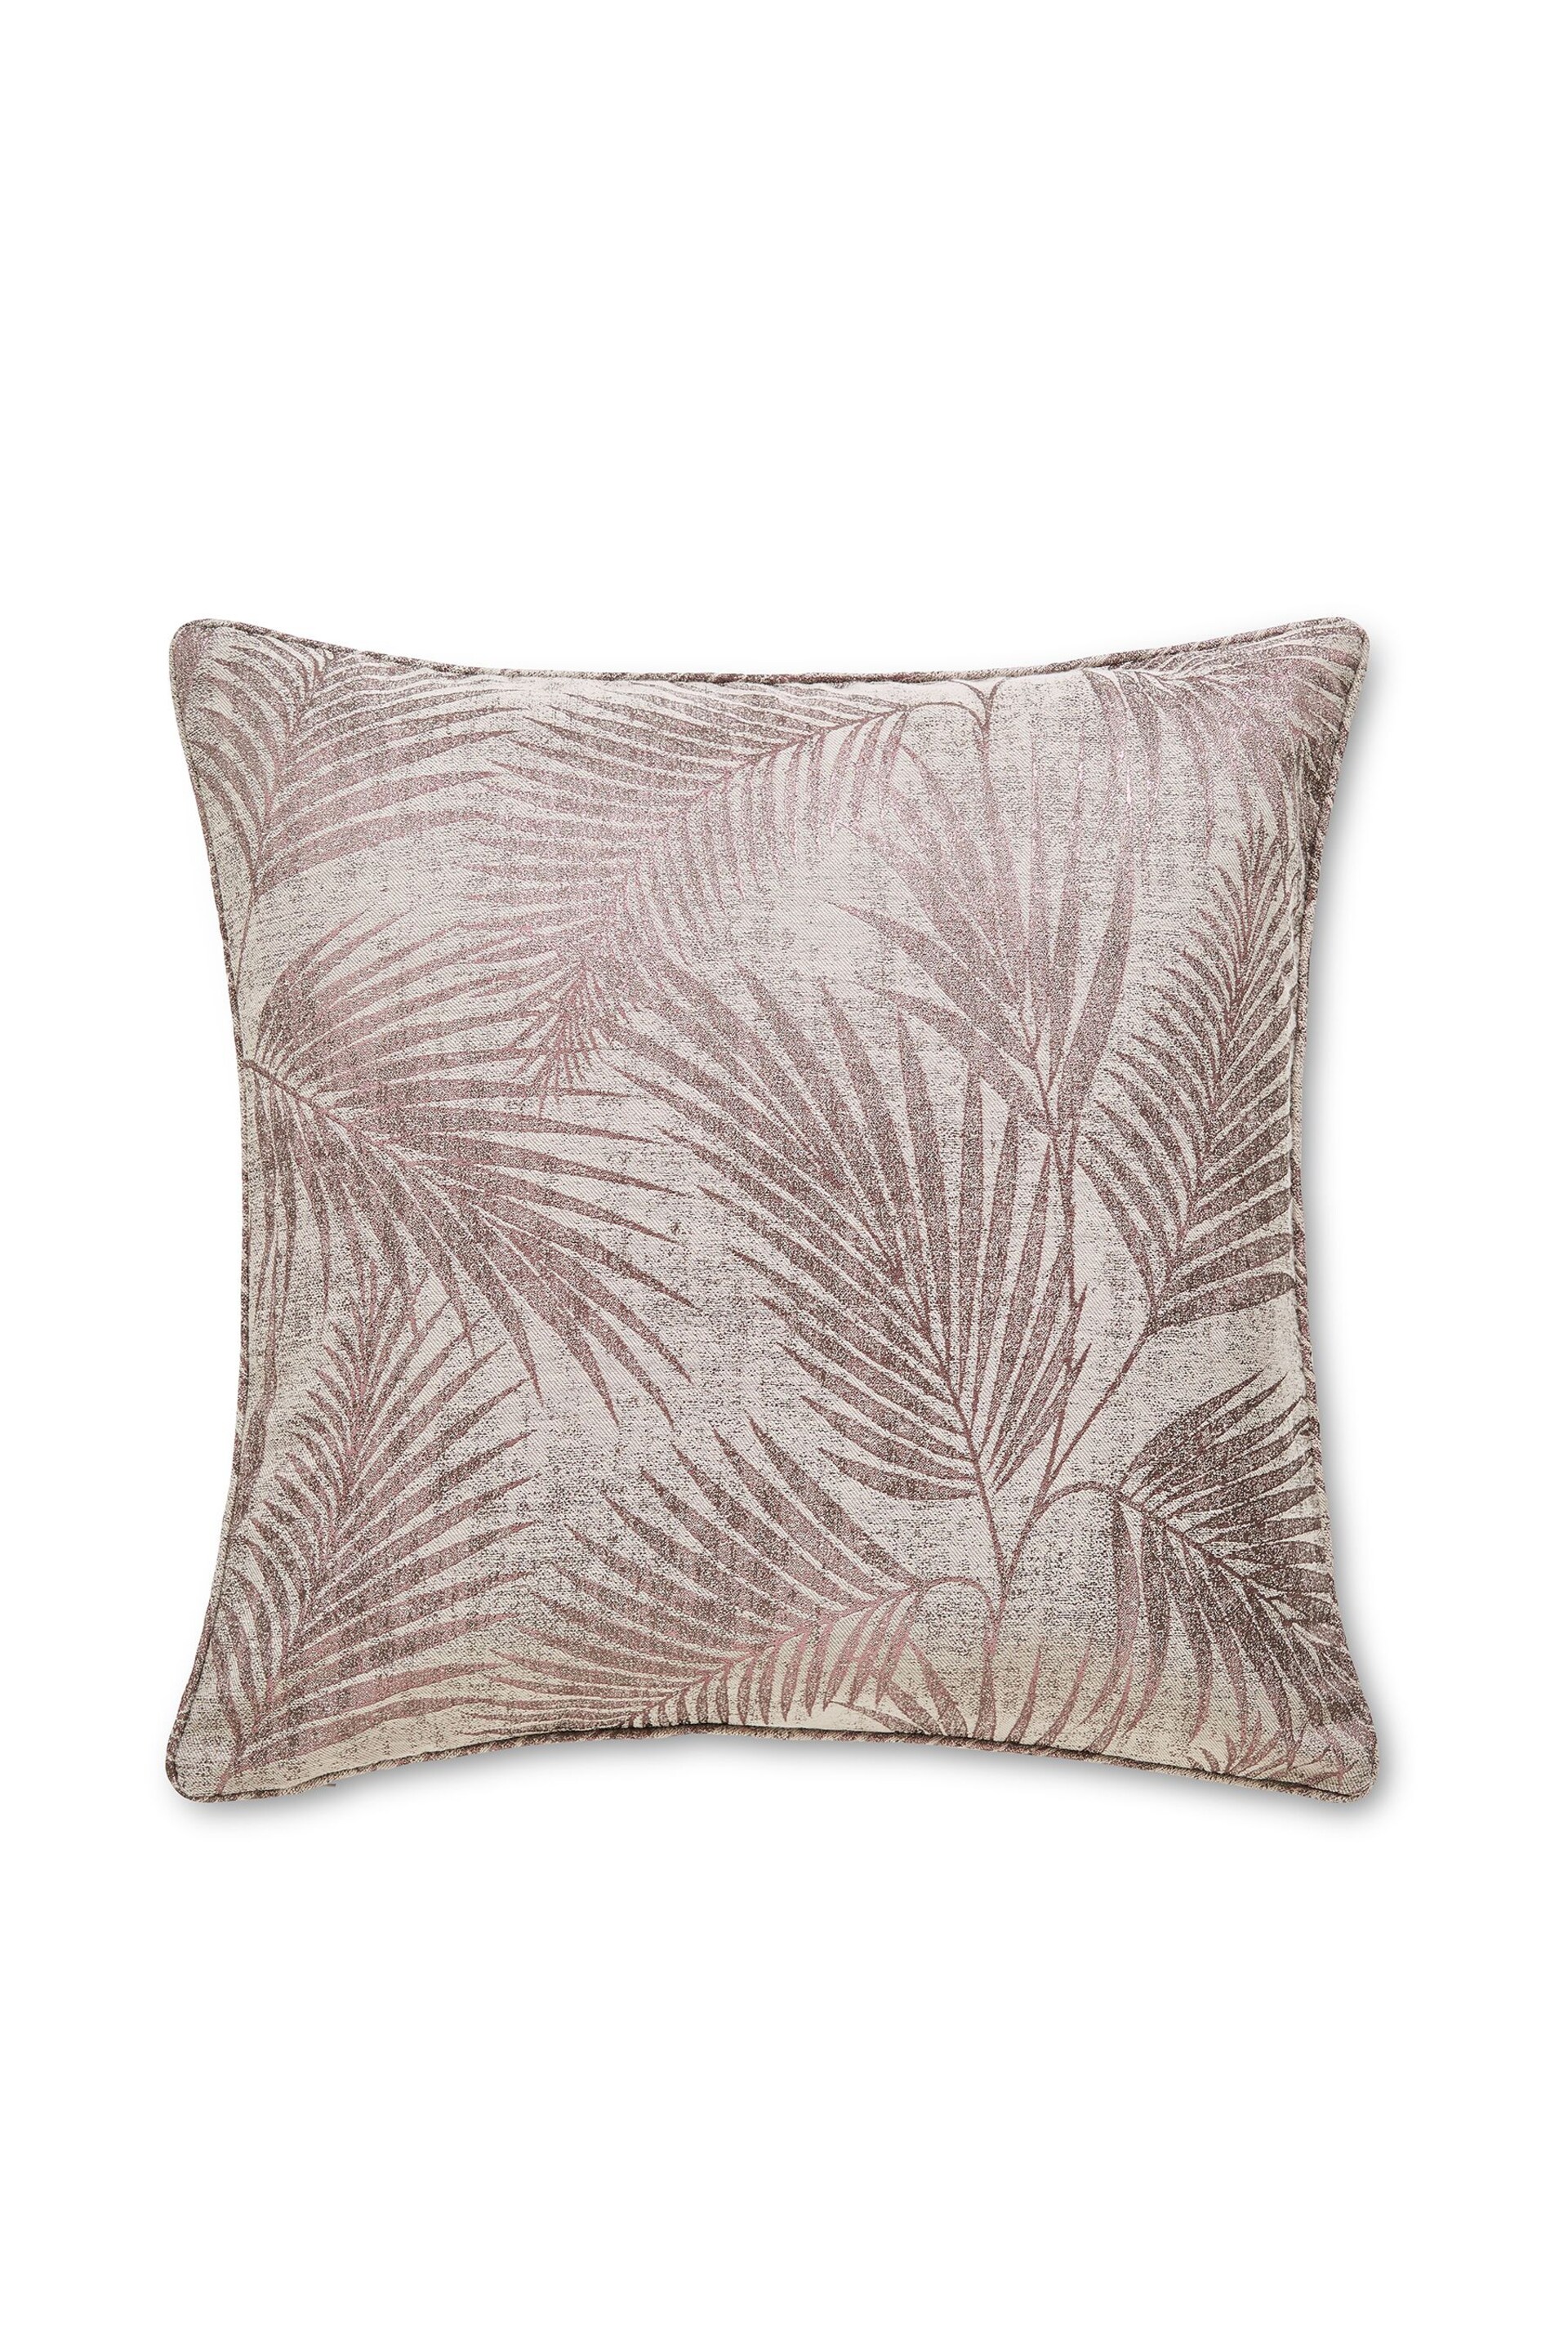 Hyperion Natural Tamra Palm Piped Cushion - Image 3 of 3